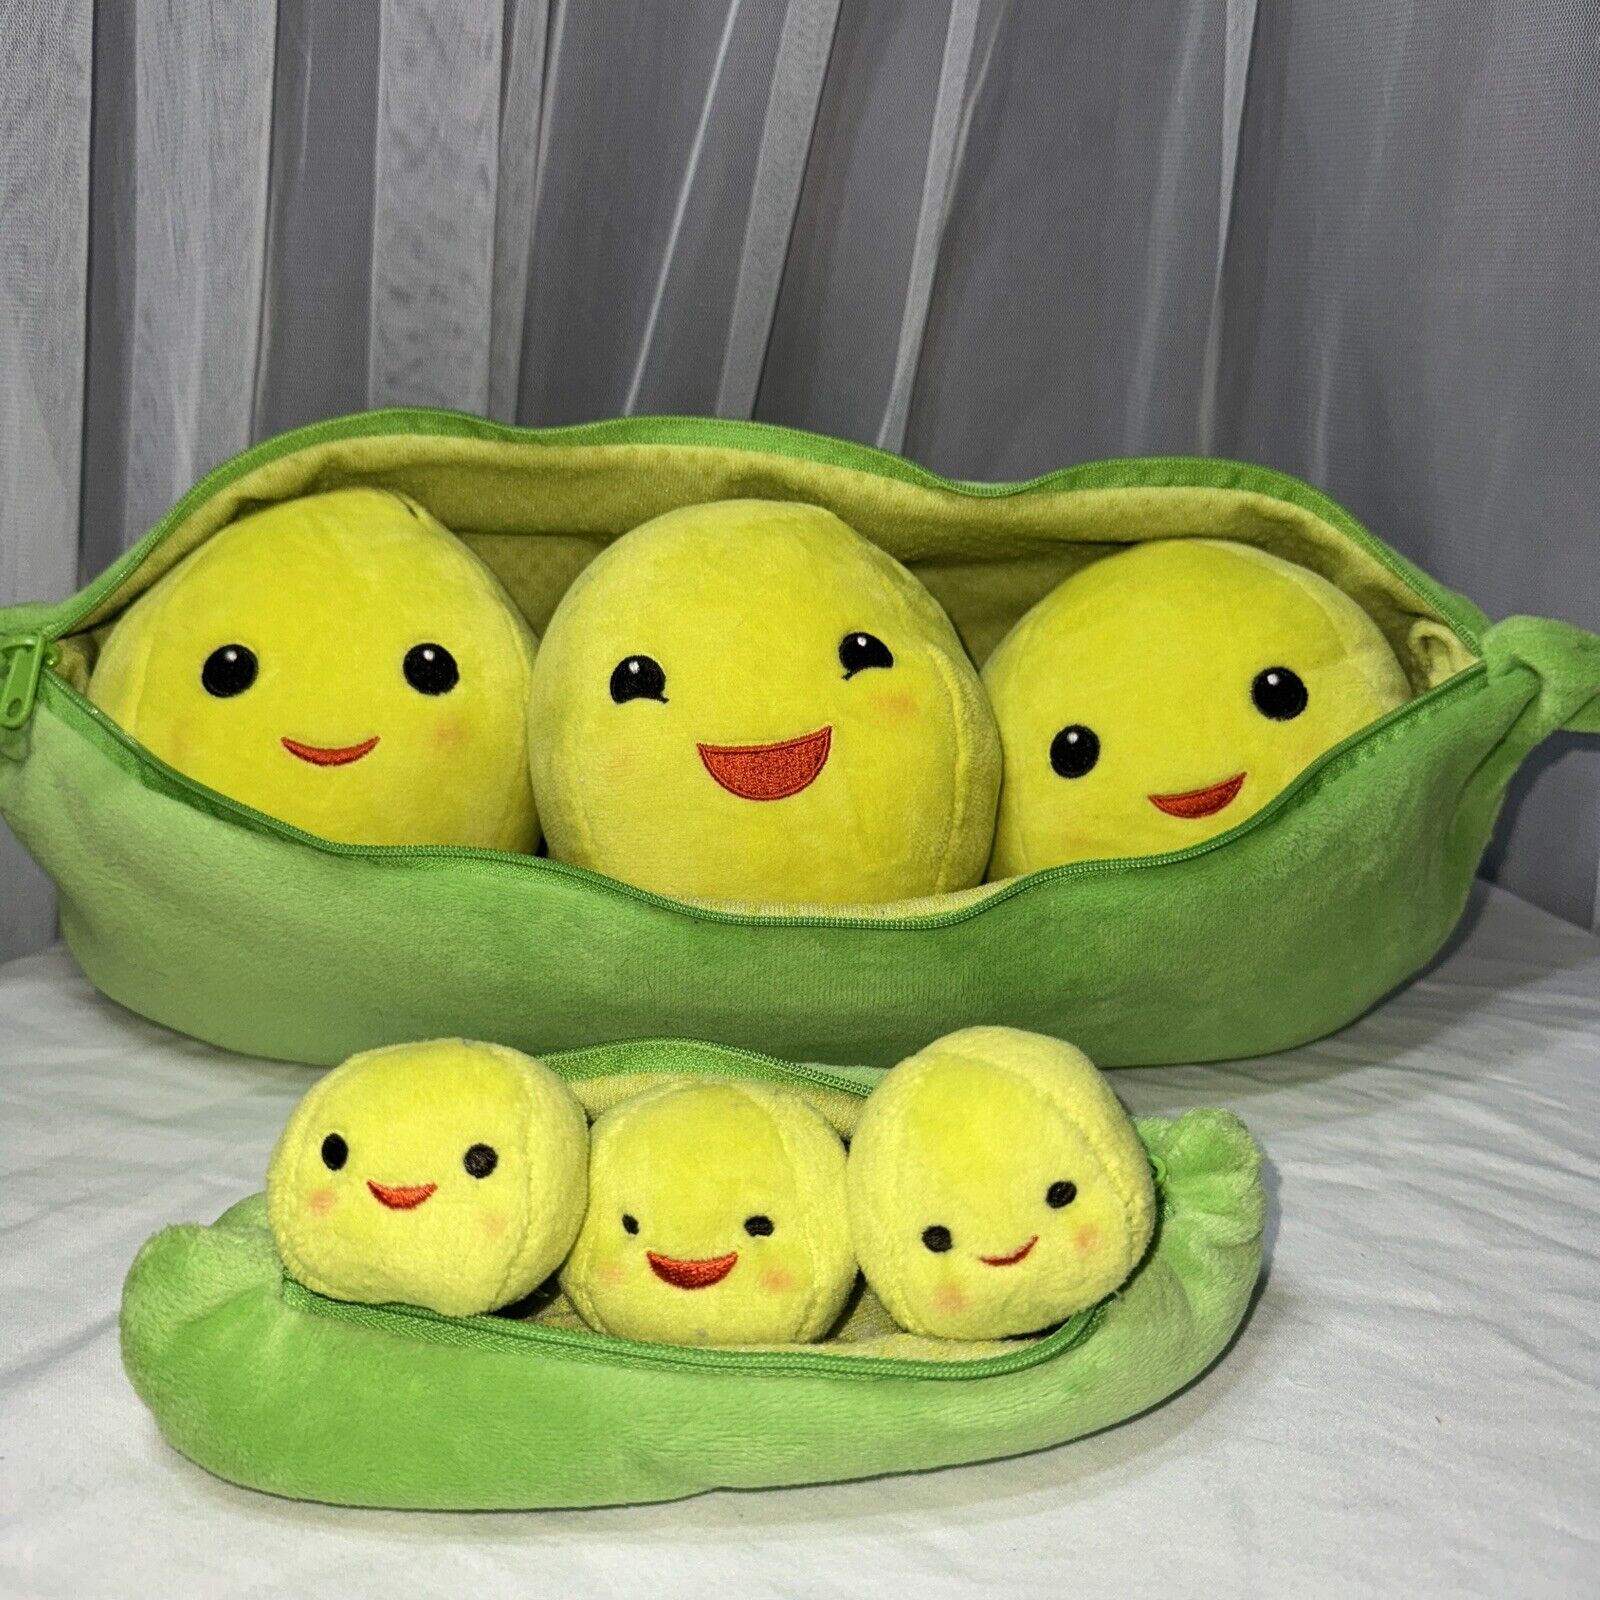 Toy Story Peas in a Pod Tokyo Disney Resort Plush Doll Green Beans Limited Japan